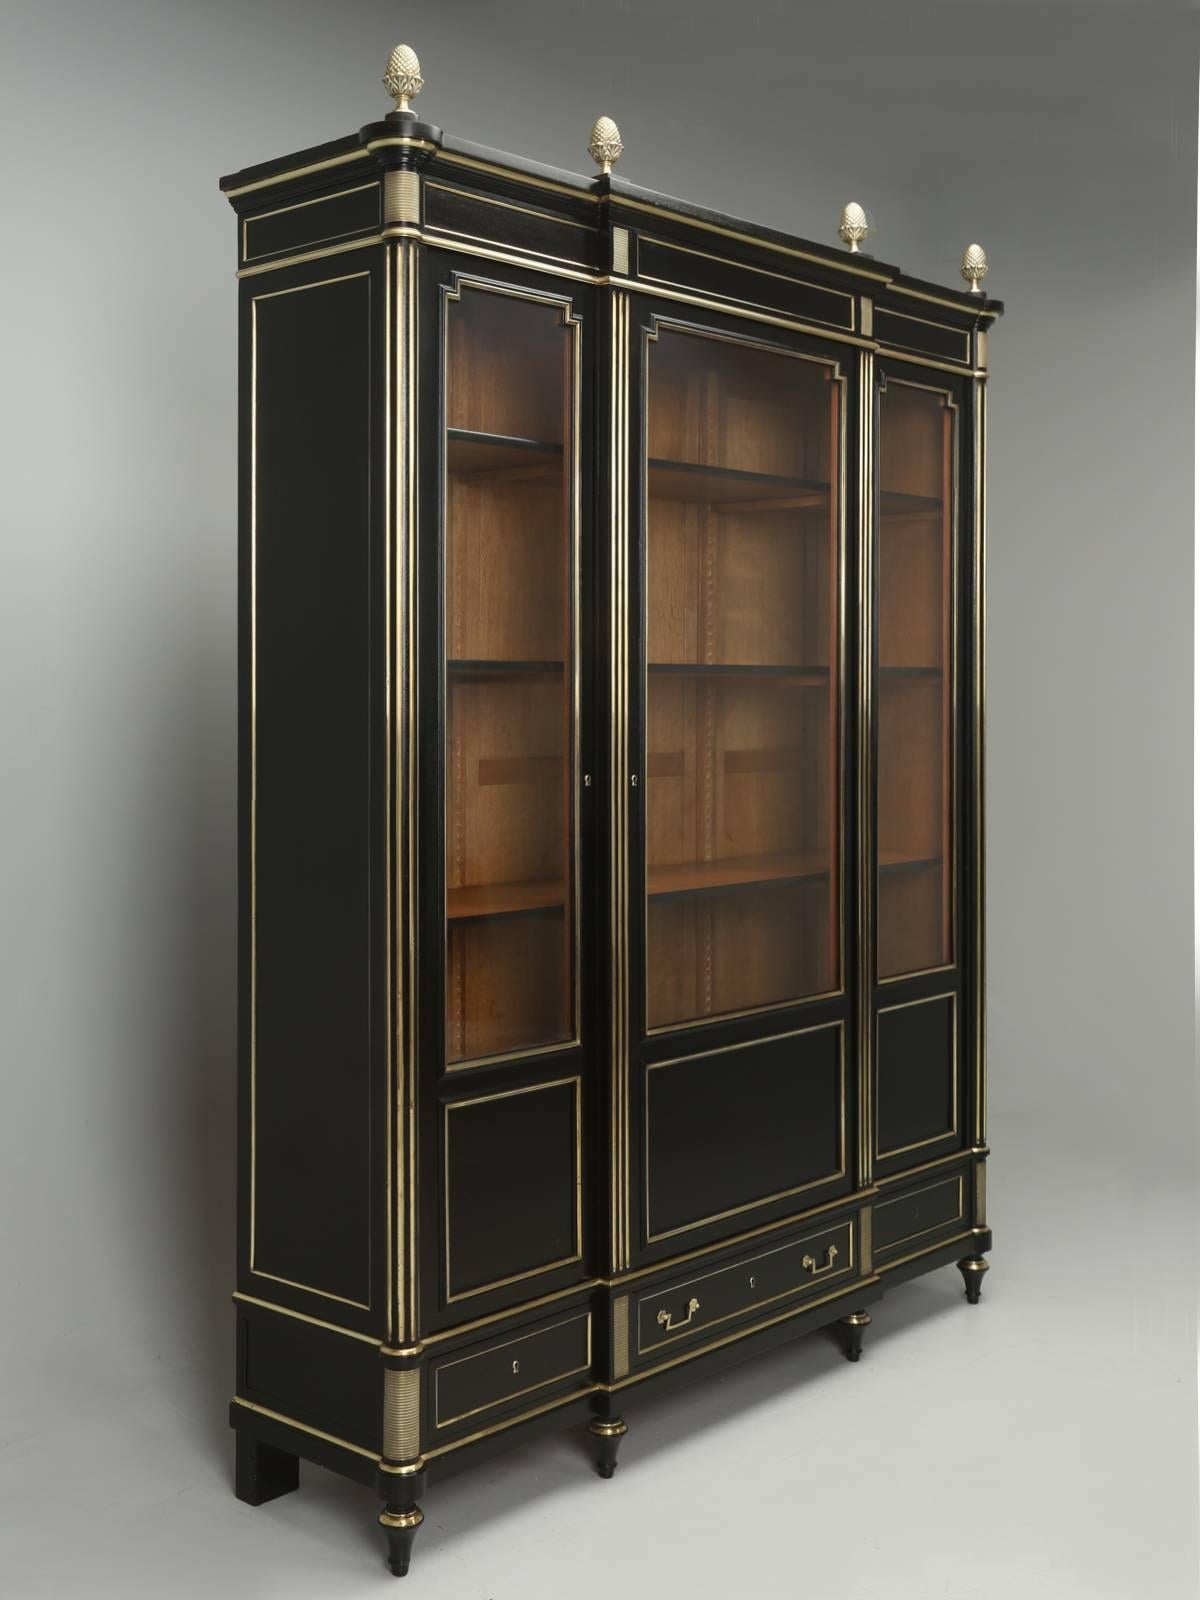 Antique French ebonized bookcase, made from solid mahogany with brass trim, circa 1900. The interior features fully adjustable shelves made from French white oak. Exterior has three drawers under the glass doors. This antique French ebonized